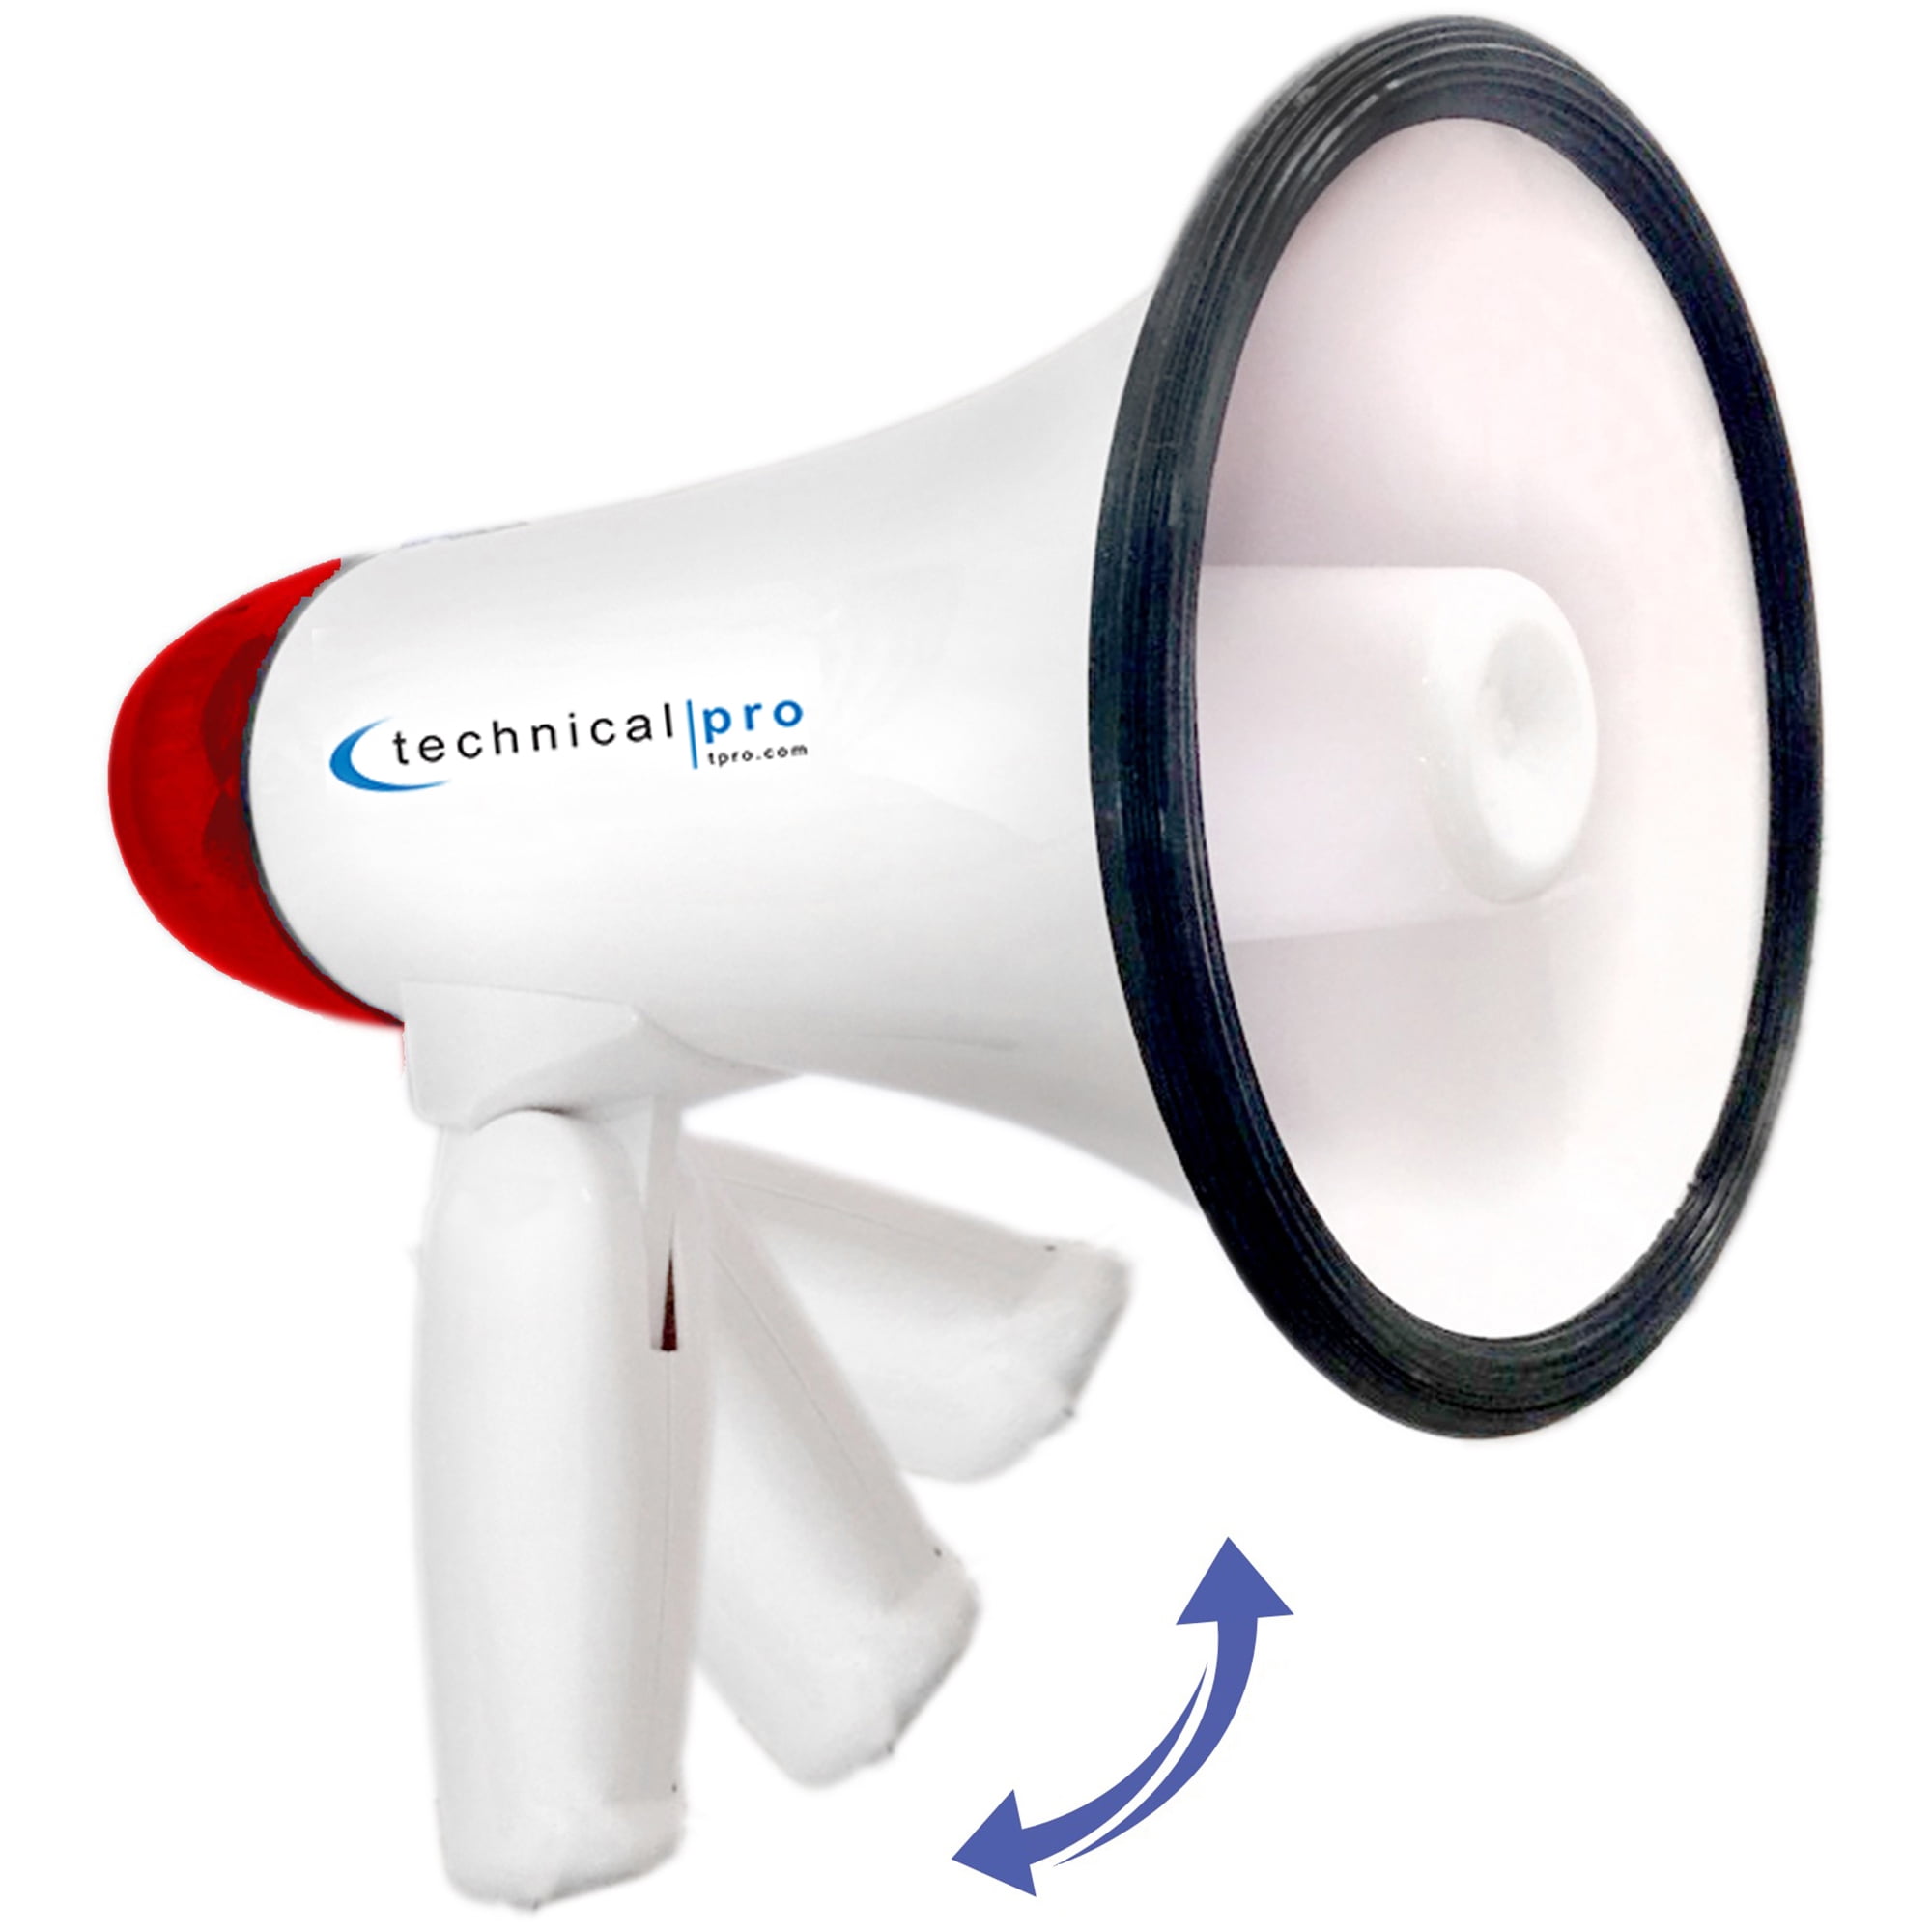 Compact Design Technical Pro Lightweight 2000ft Range 15 Watts Portable Megaphone Bullhorn with Strap Siren and Volume Control Use at Sports Events Camps Cheer Leading Coaches and Safety Drills 